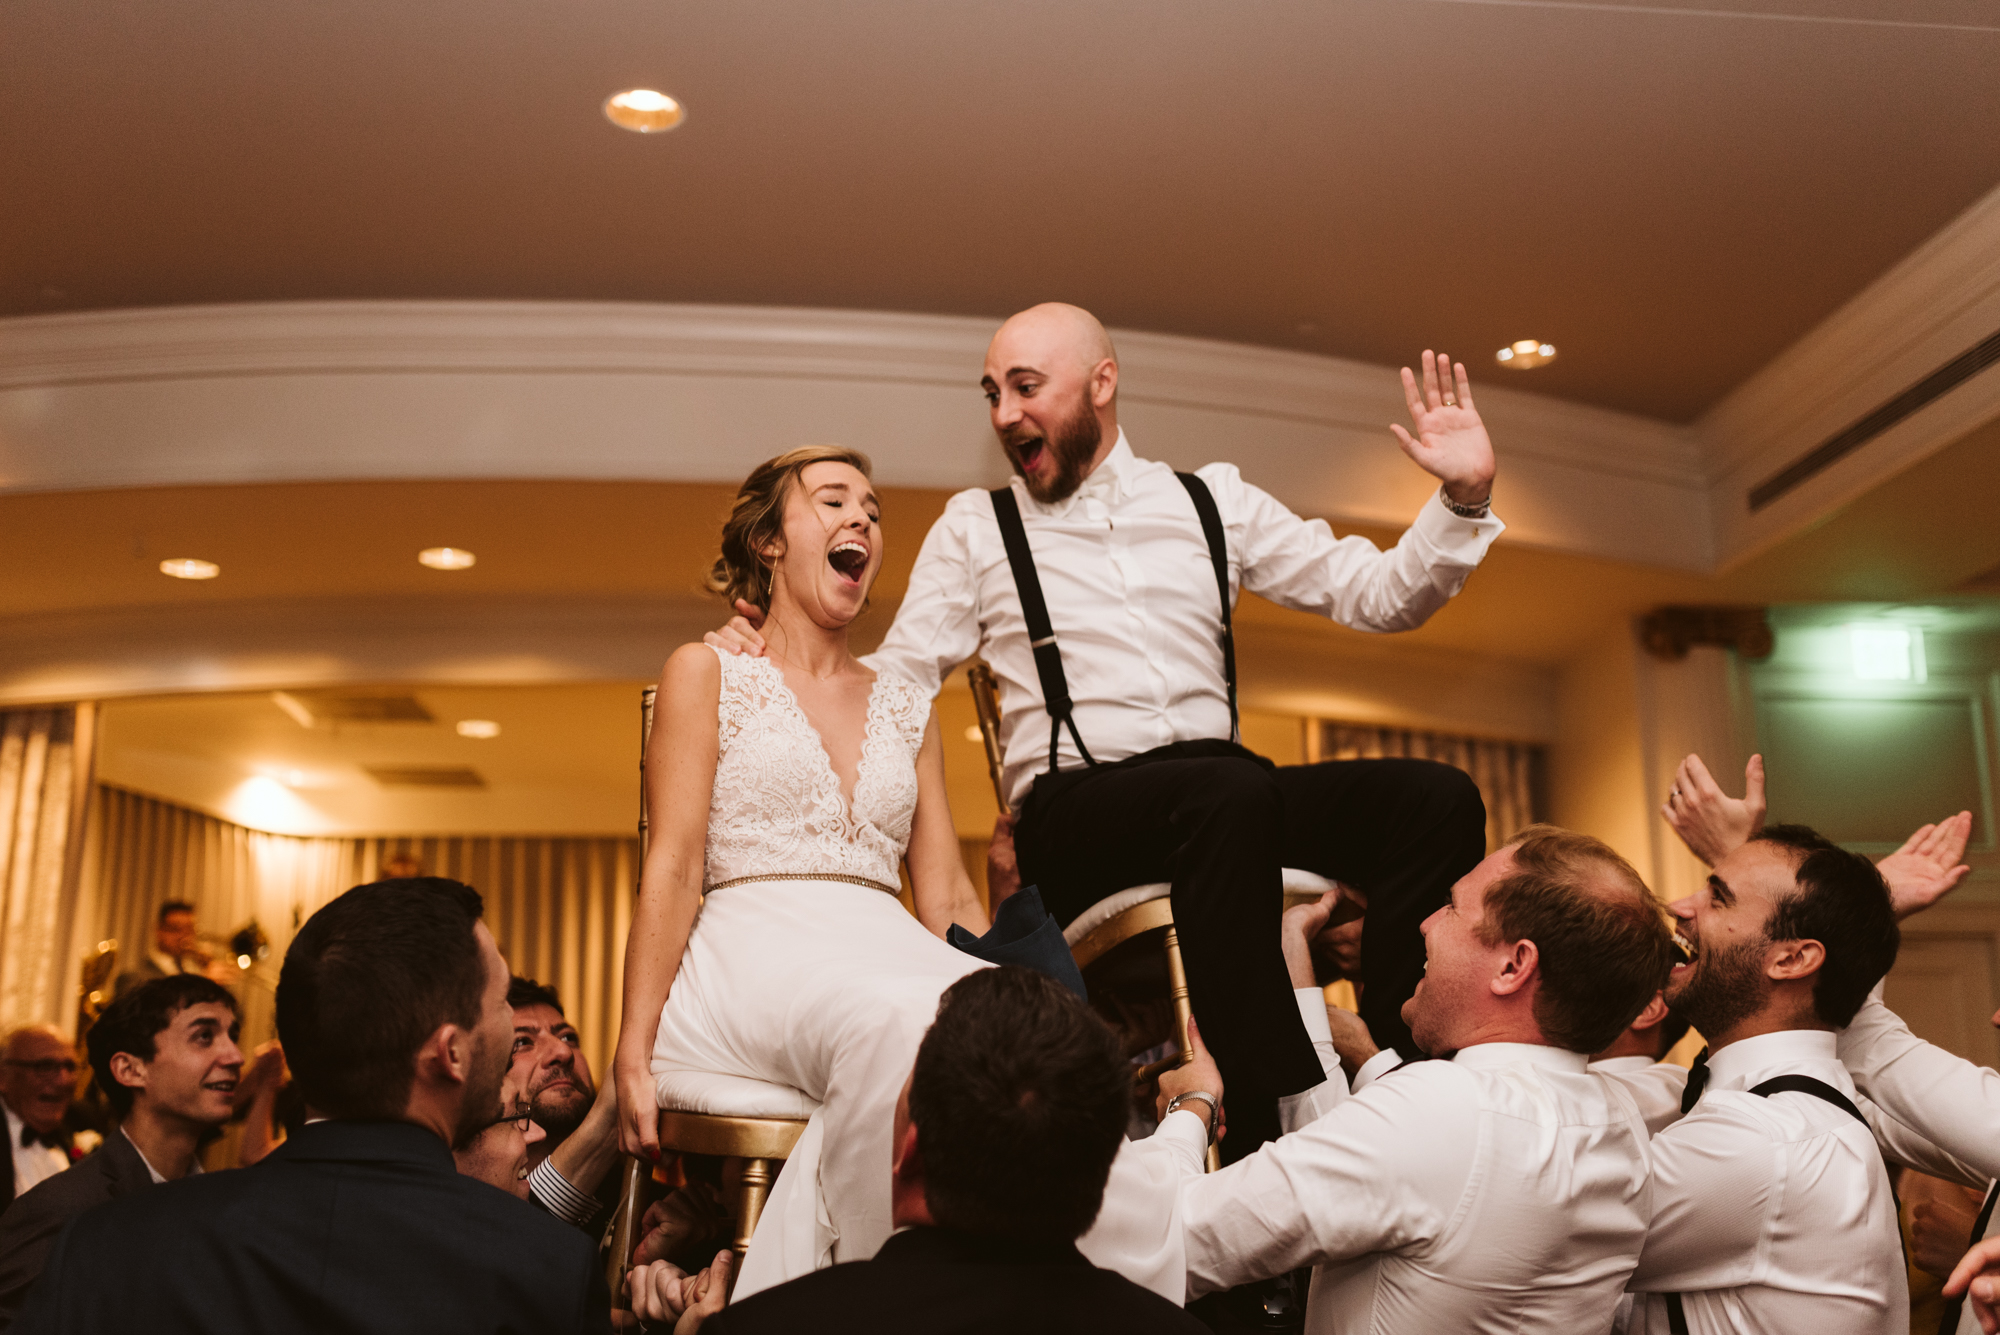 Elegant, Columbia Country Club, Chevy Chase Maryland, Baltimore Wedding Photographer, Classic, Traditional, Jewish Wedding, Bride and Groom Doing the Hora